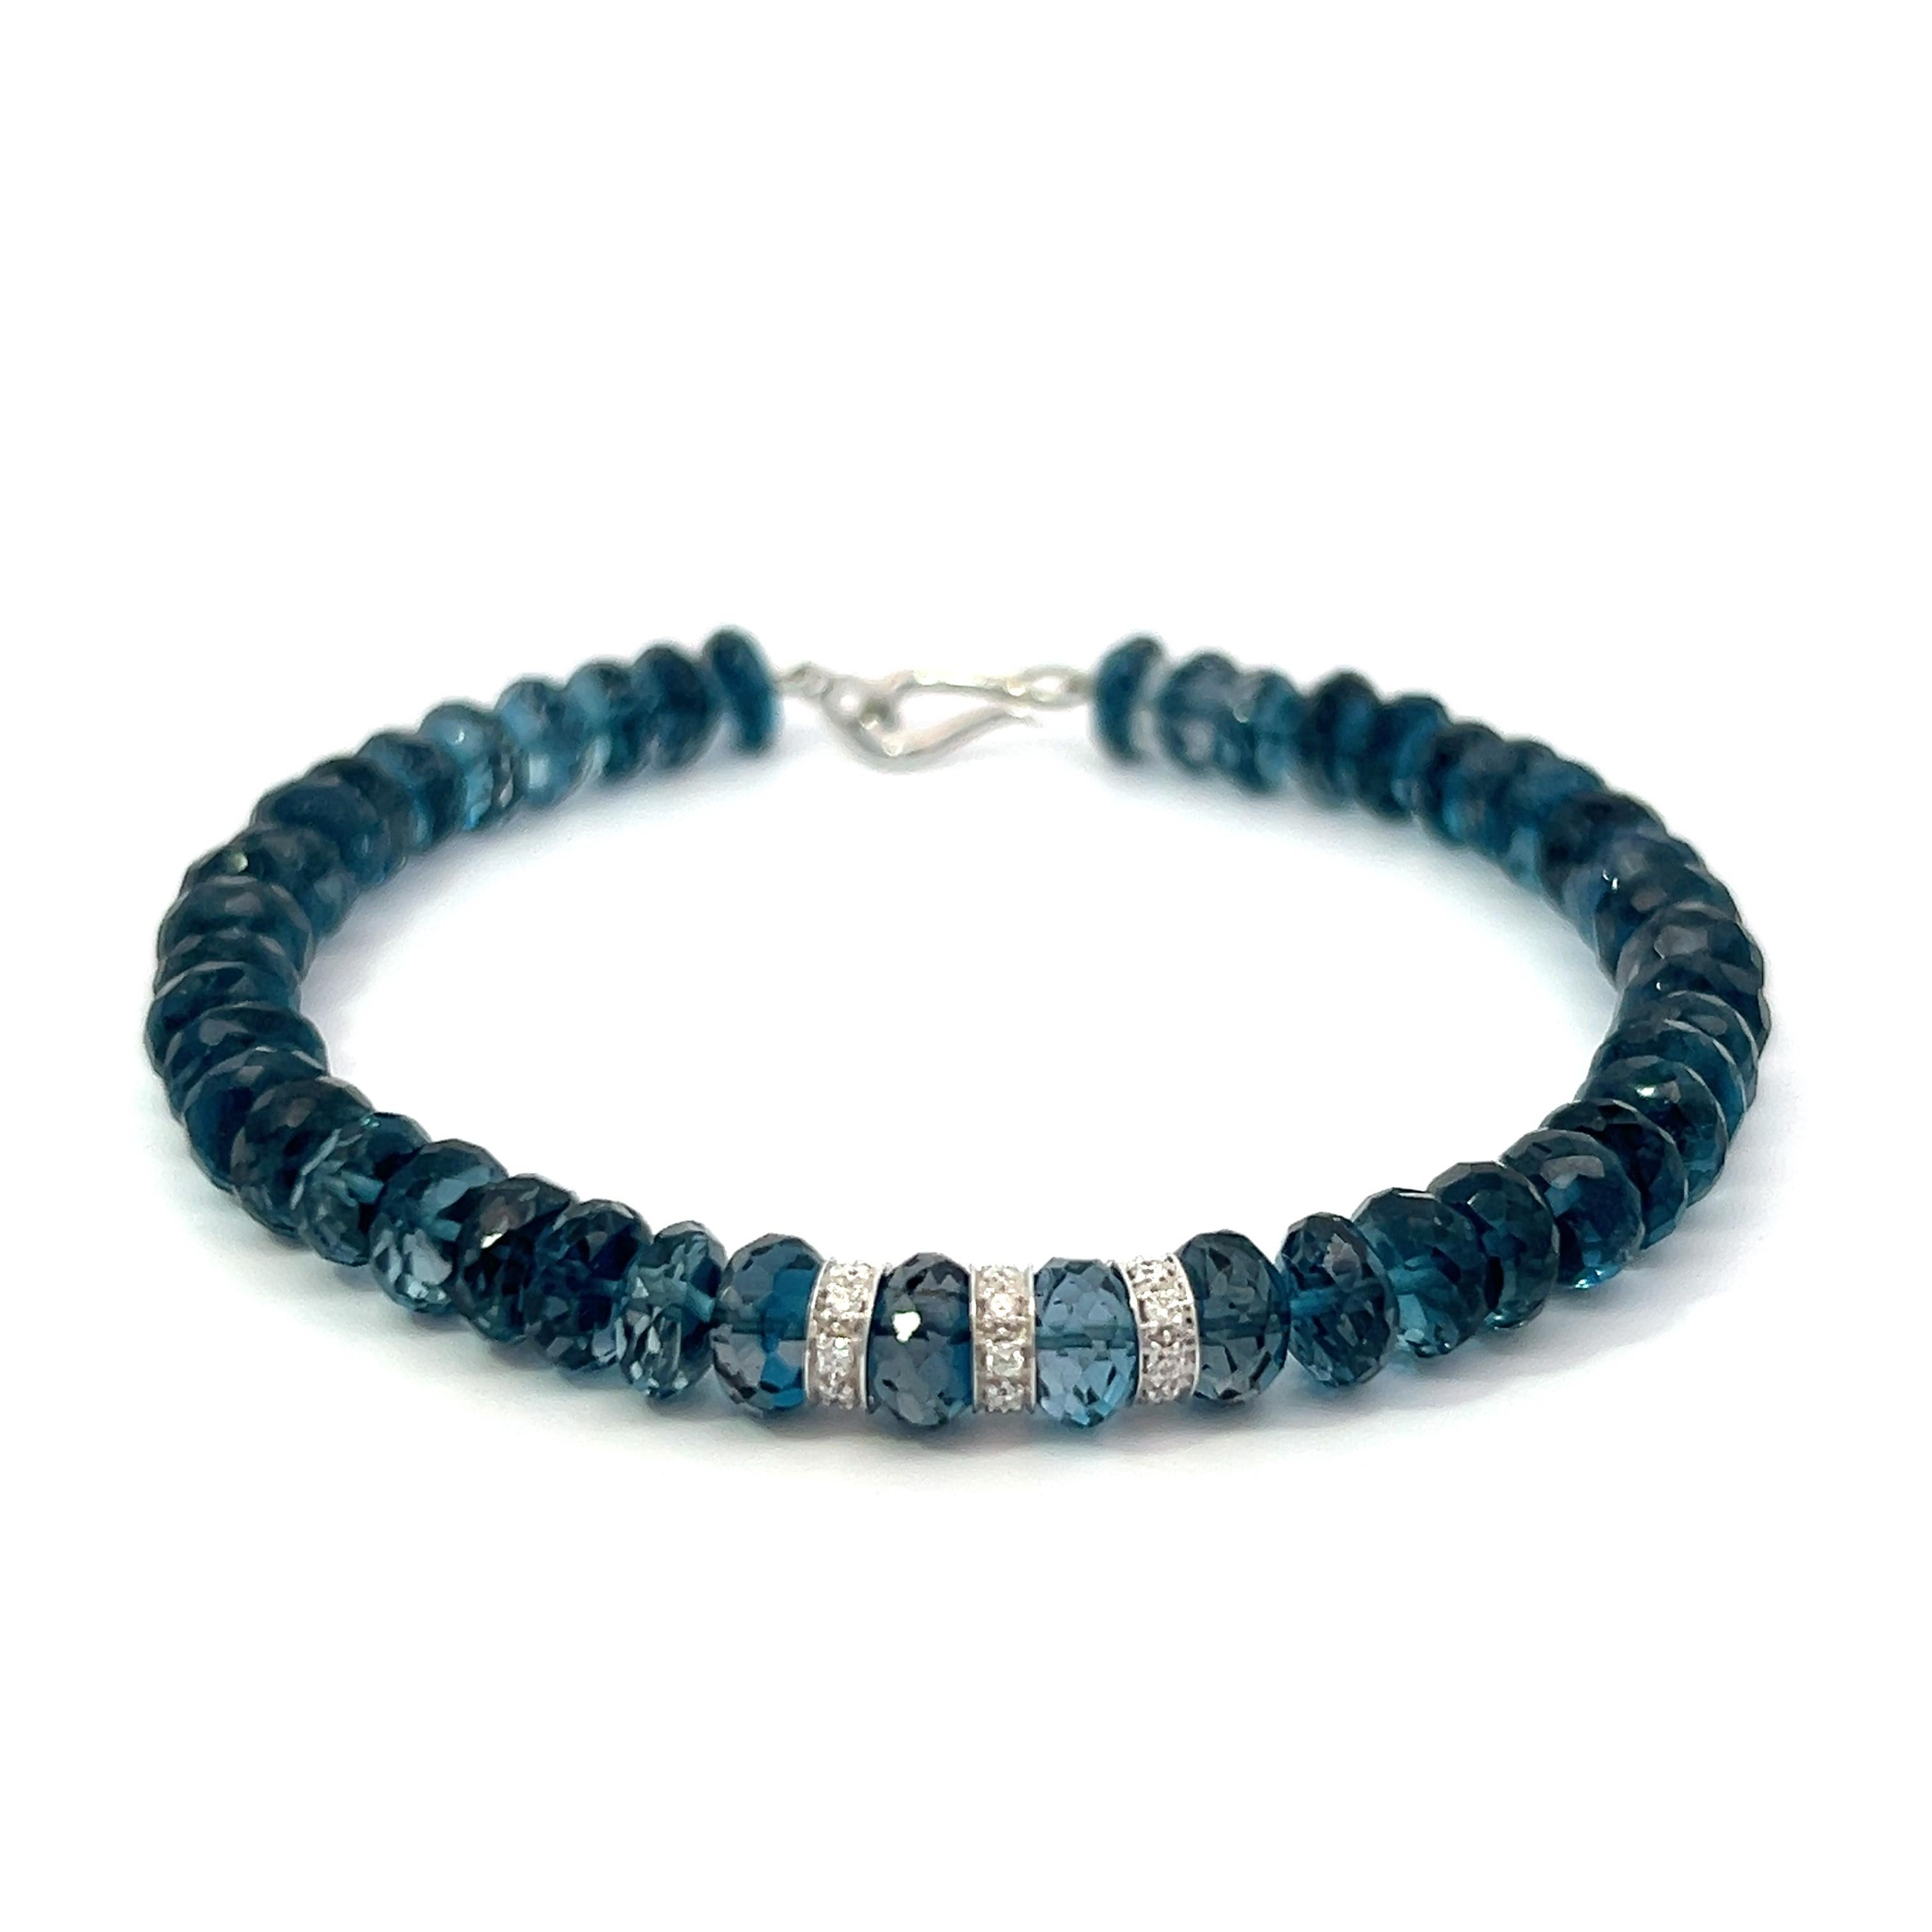 The London Blue Topaz Bead Bracelet, meticulously crafted to captivate and enchant. Each bead of this bracelet boasts the allure of gem-quality London Blue Topaz, emanating a mesmerizing deep blue hue that is both luxurious and striking.